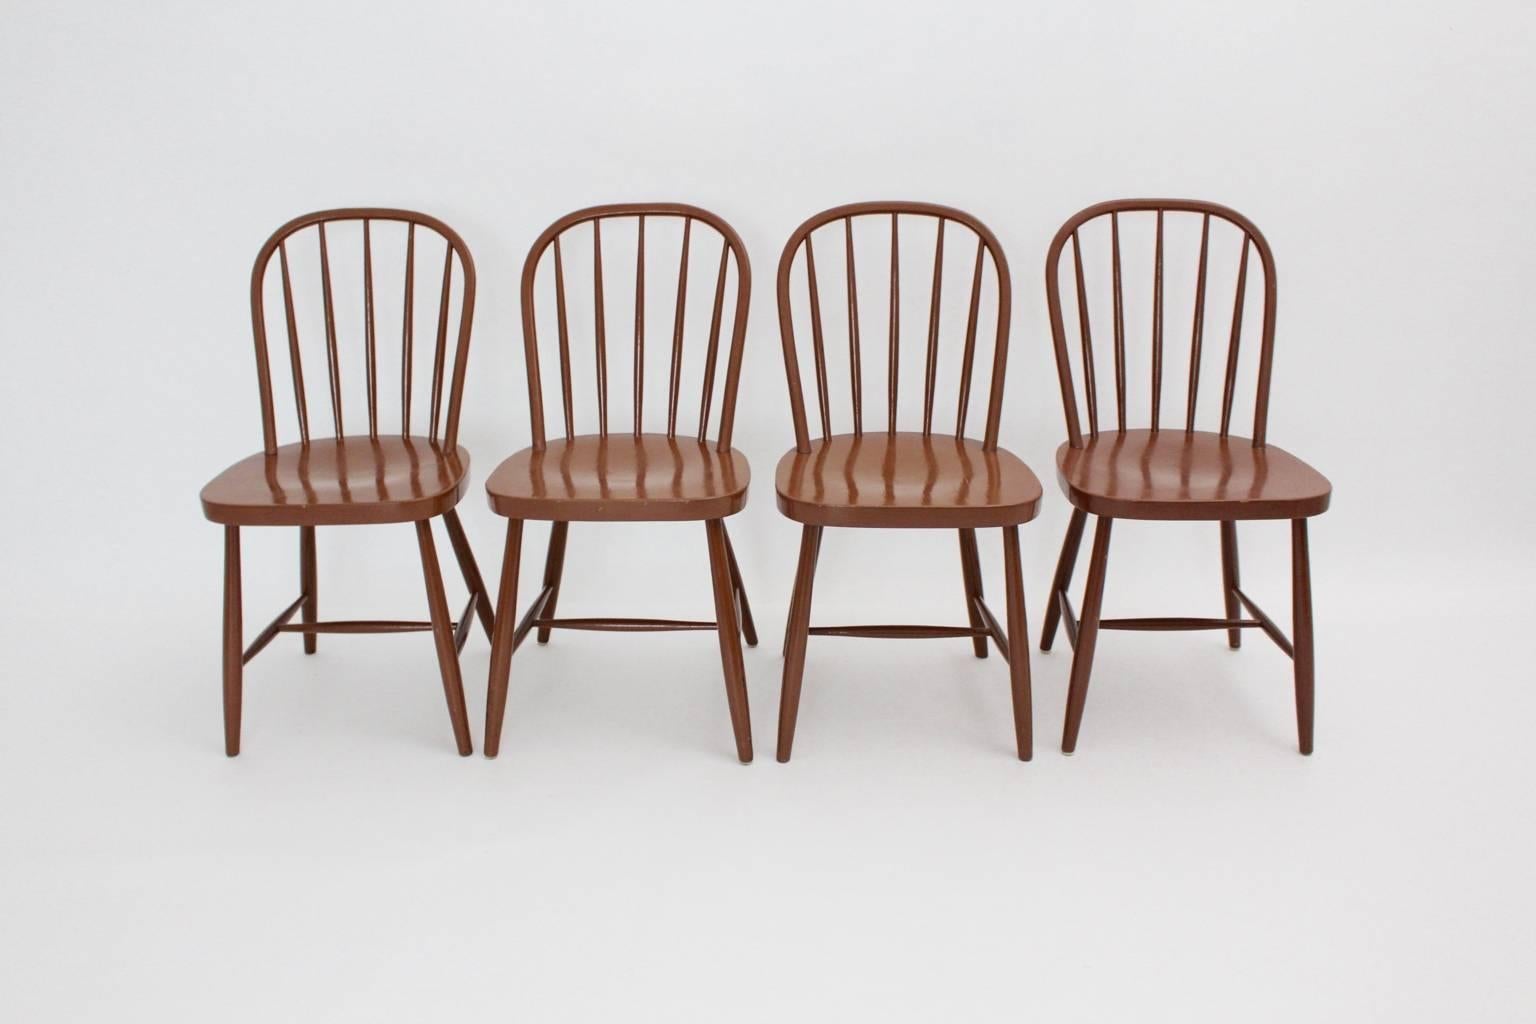 Art Deco vintage Windsor chairs or dining chairs Josef Frank attributed circa 1930 in Vienna and executed by Thonet-Mundus. It features a company´s branding label.
The chairs from brown lacquered beechwood and bentwood are stable and